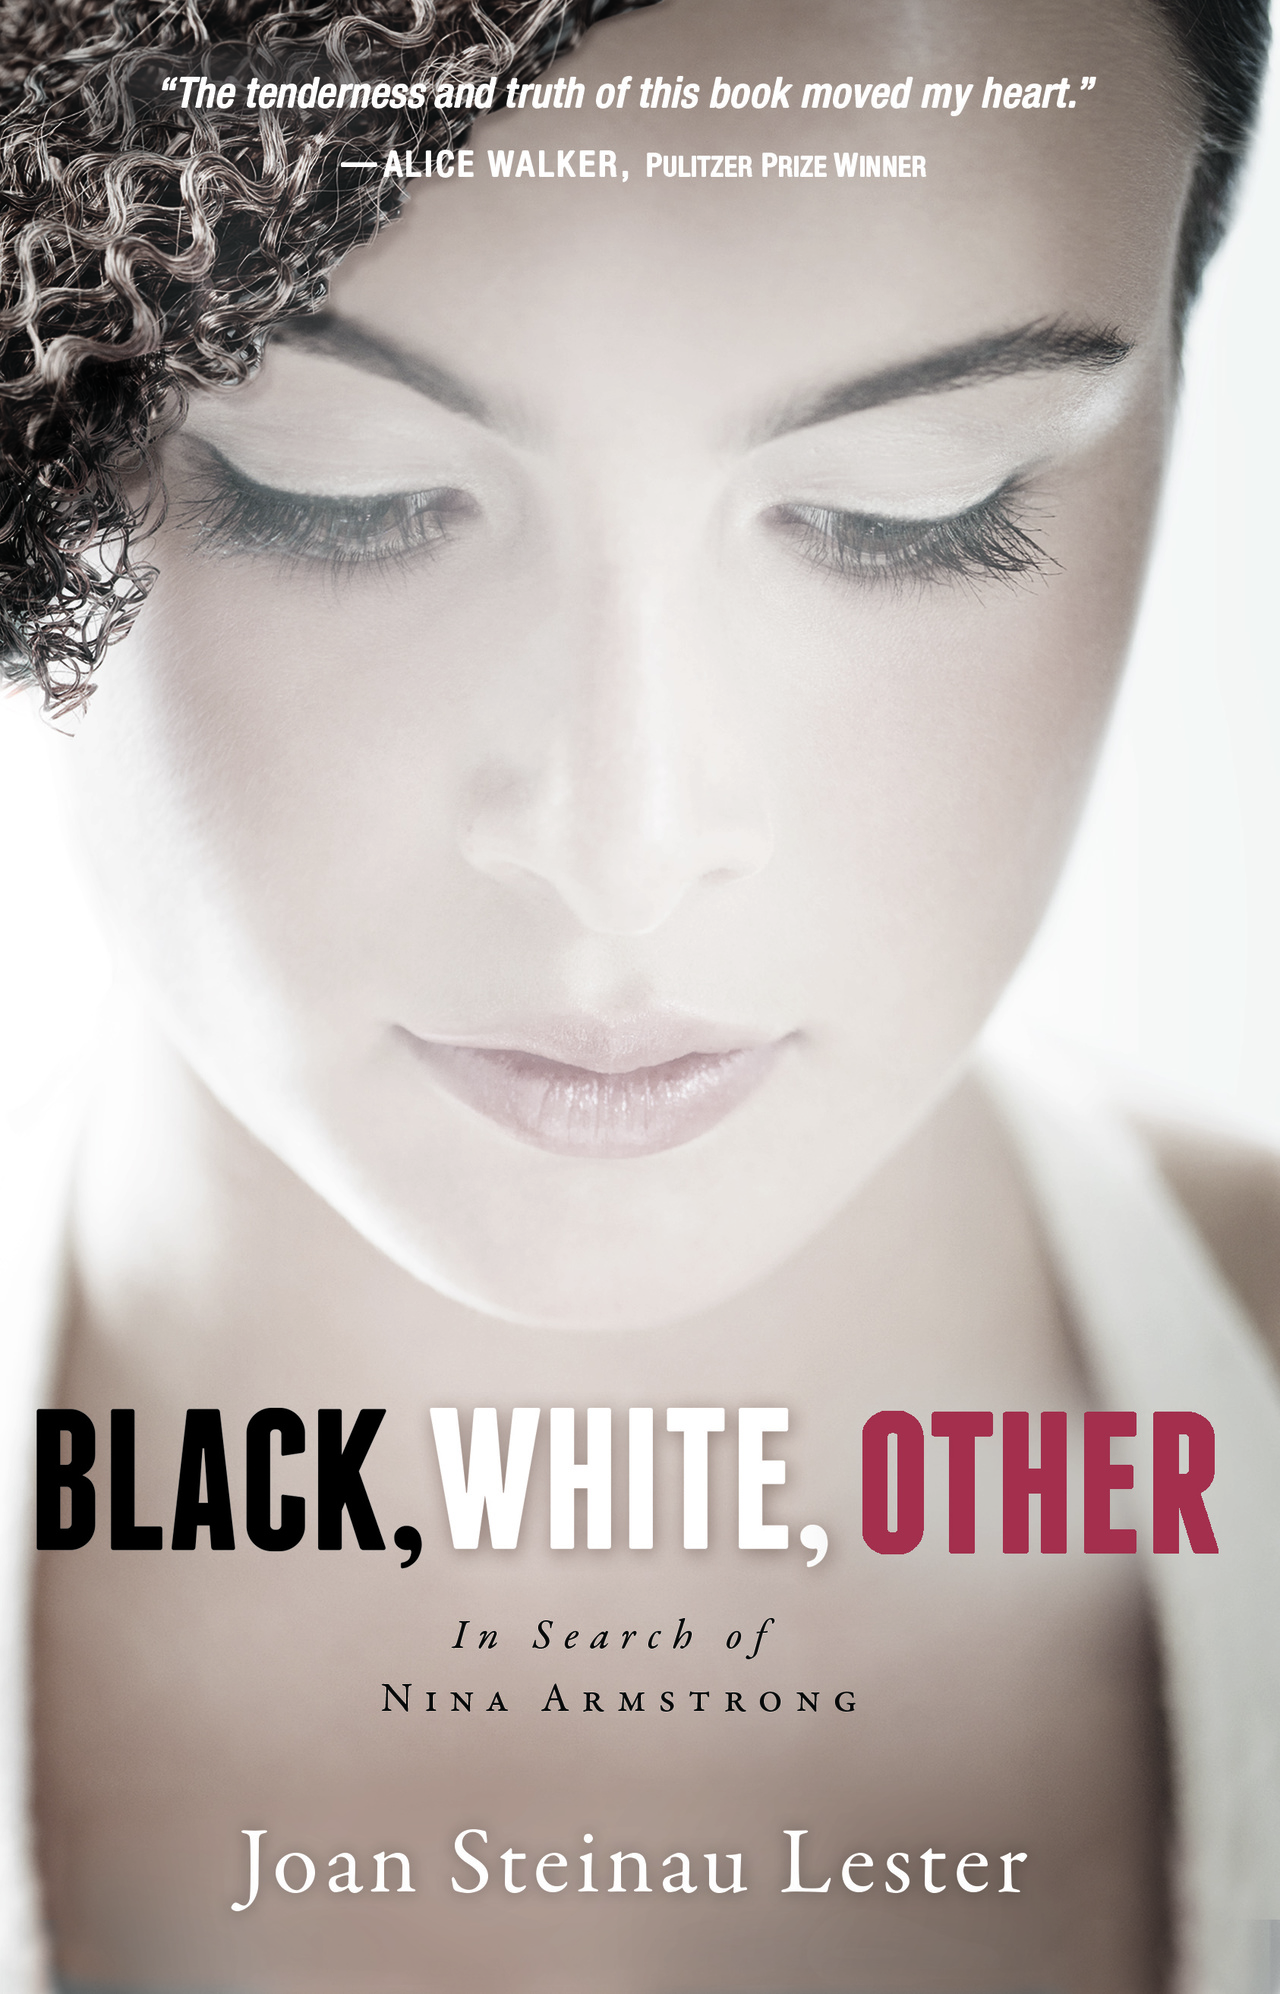 BLACK, WHITE, OTHER. A Young Adult Novel